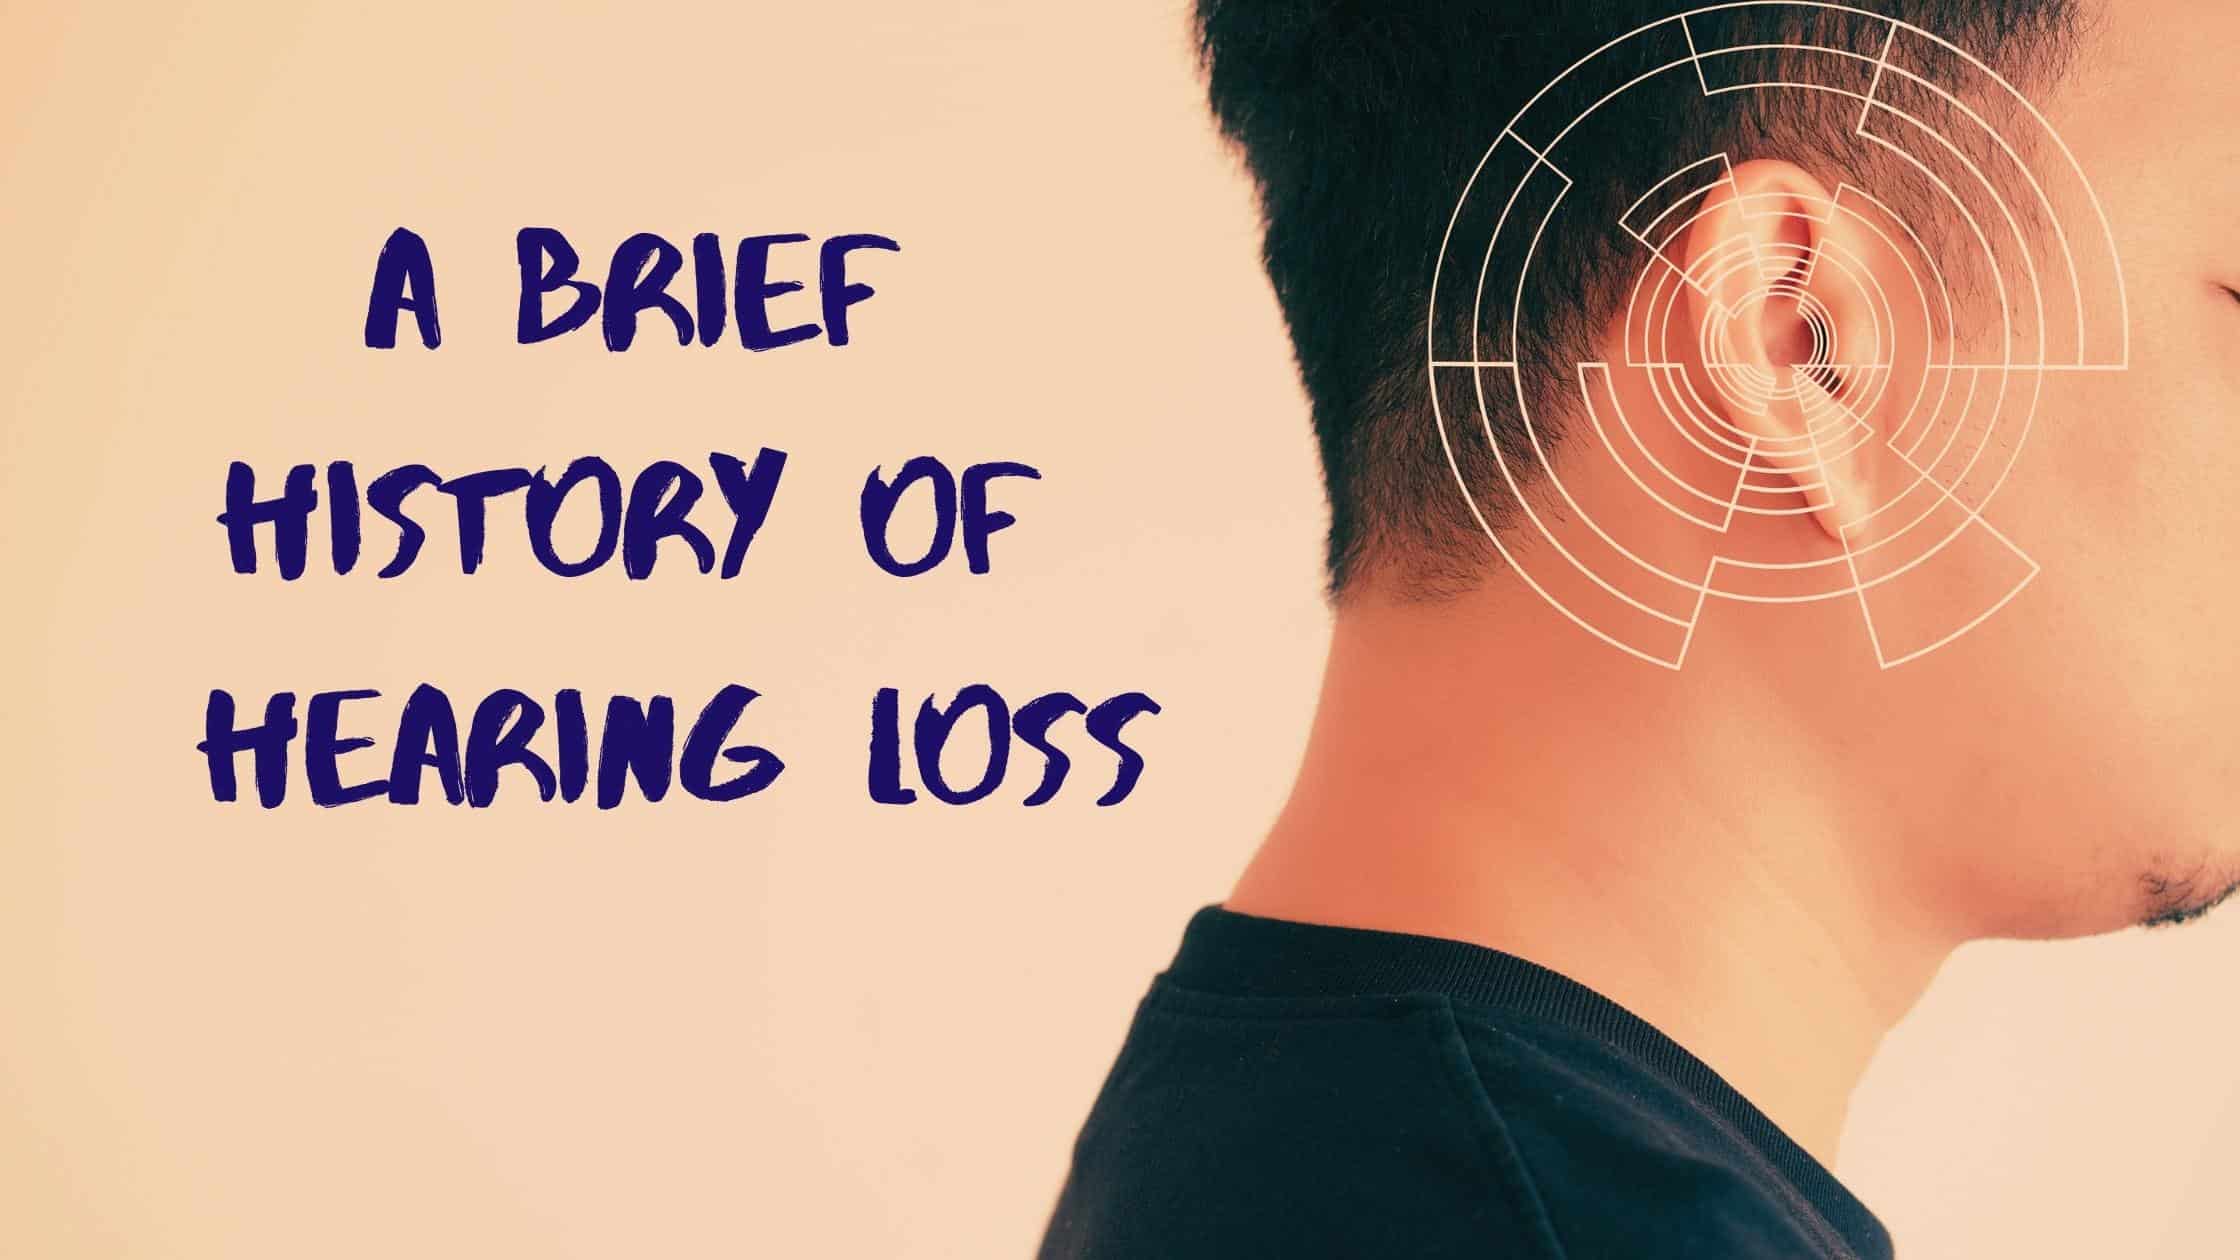 Featured image for “A Brief History of Hearing Loss”